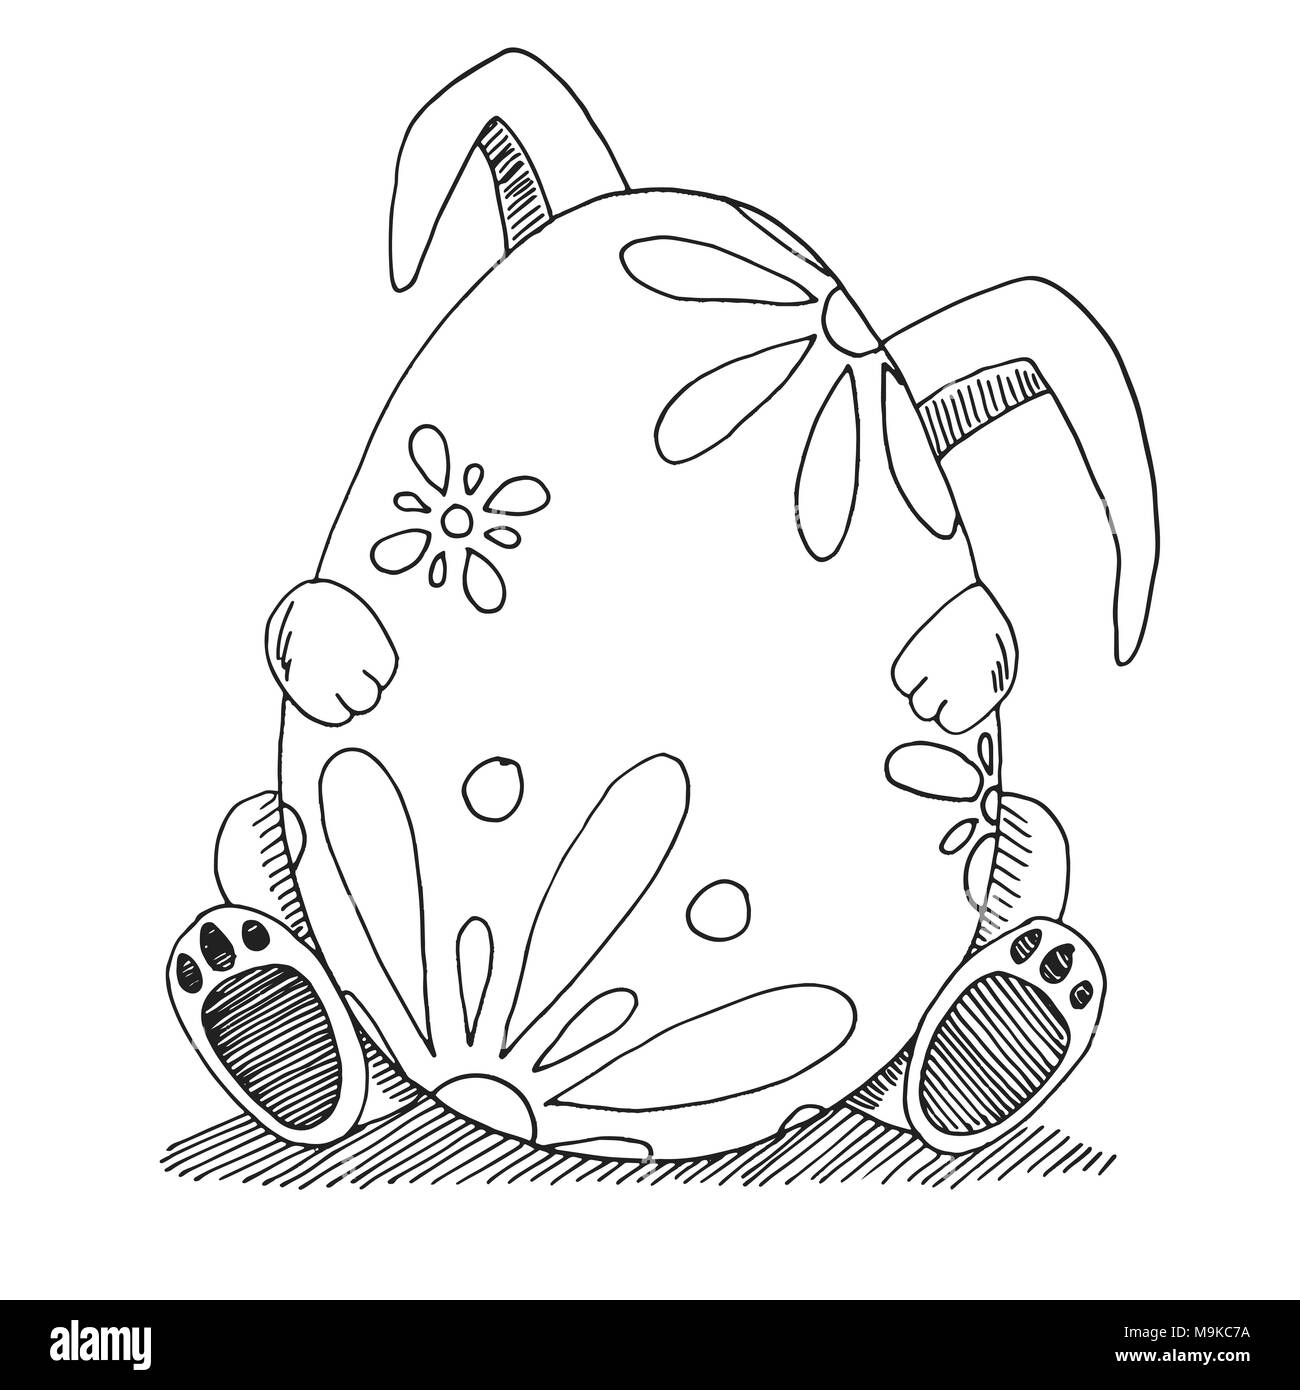 Page 2 | Easter Bunny Black White Images - Free Download on Freepik